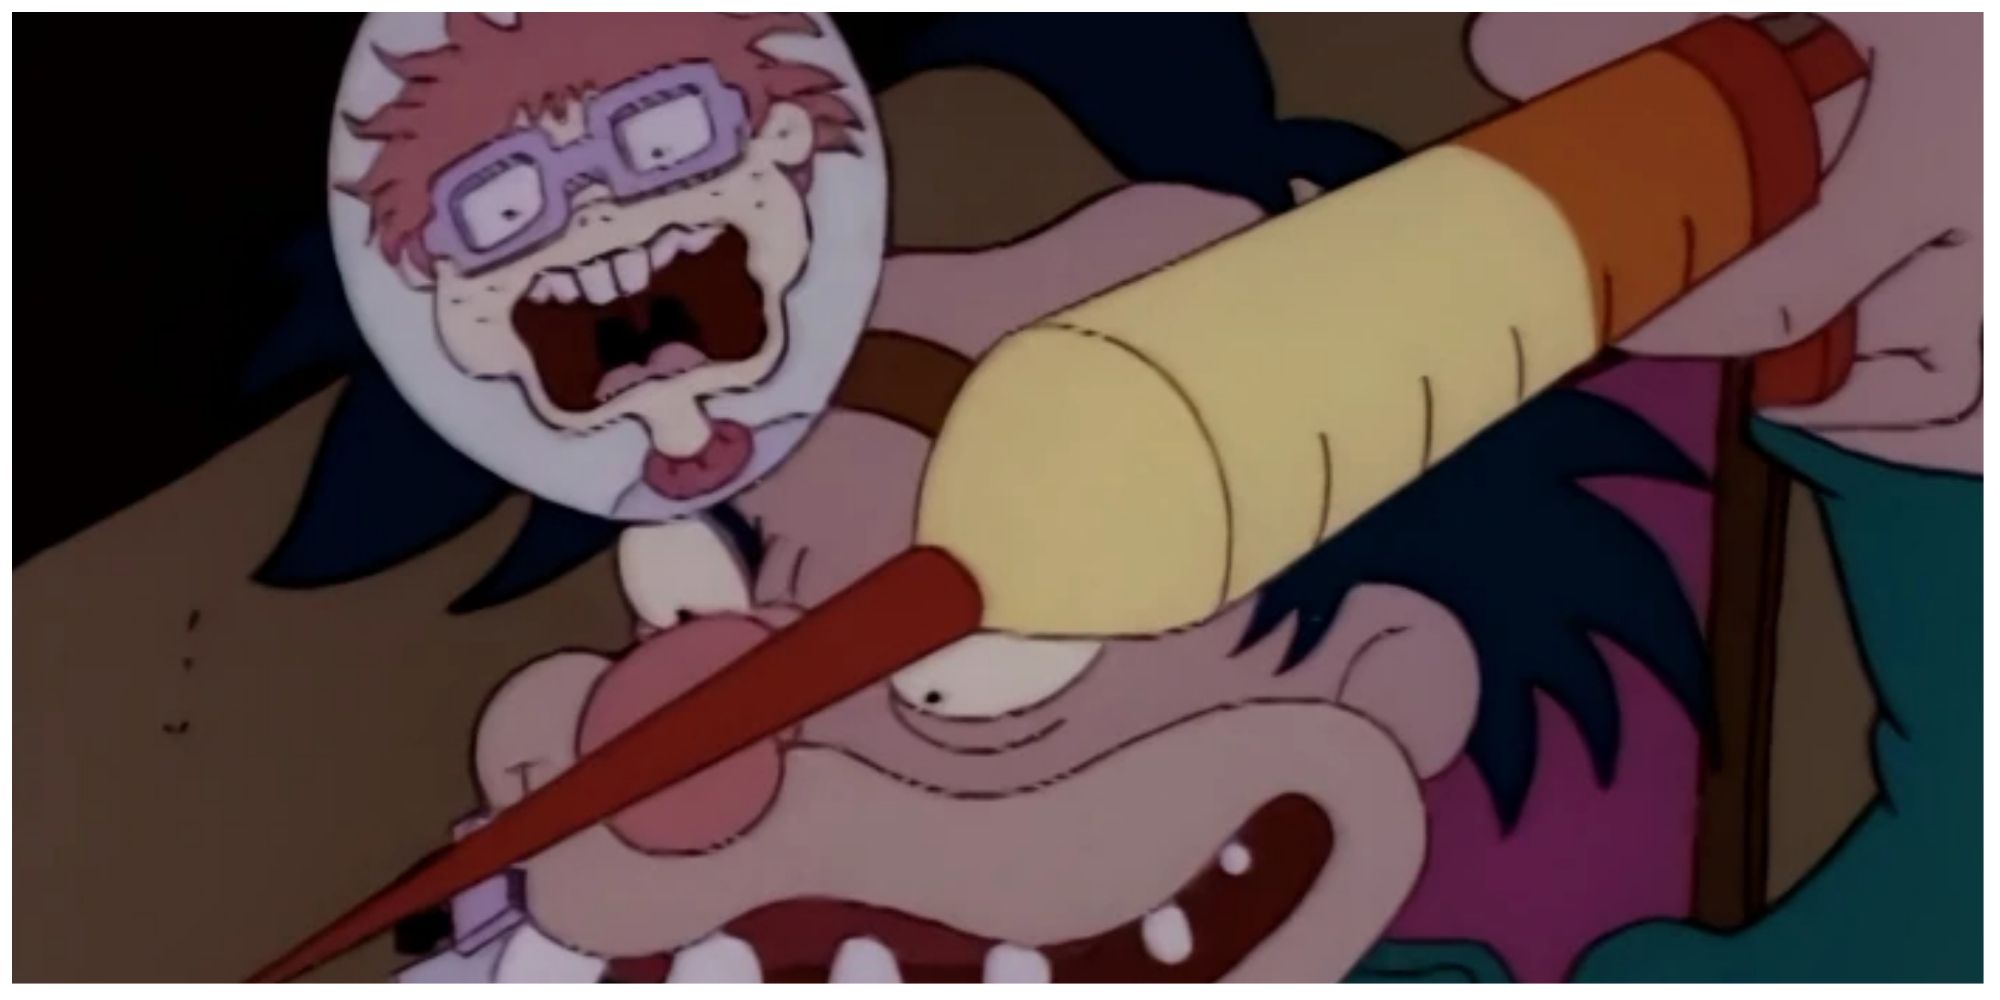 Chuckie Finster and Dr. Lector in the Rugrats season 2 episode titled the shot